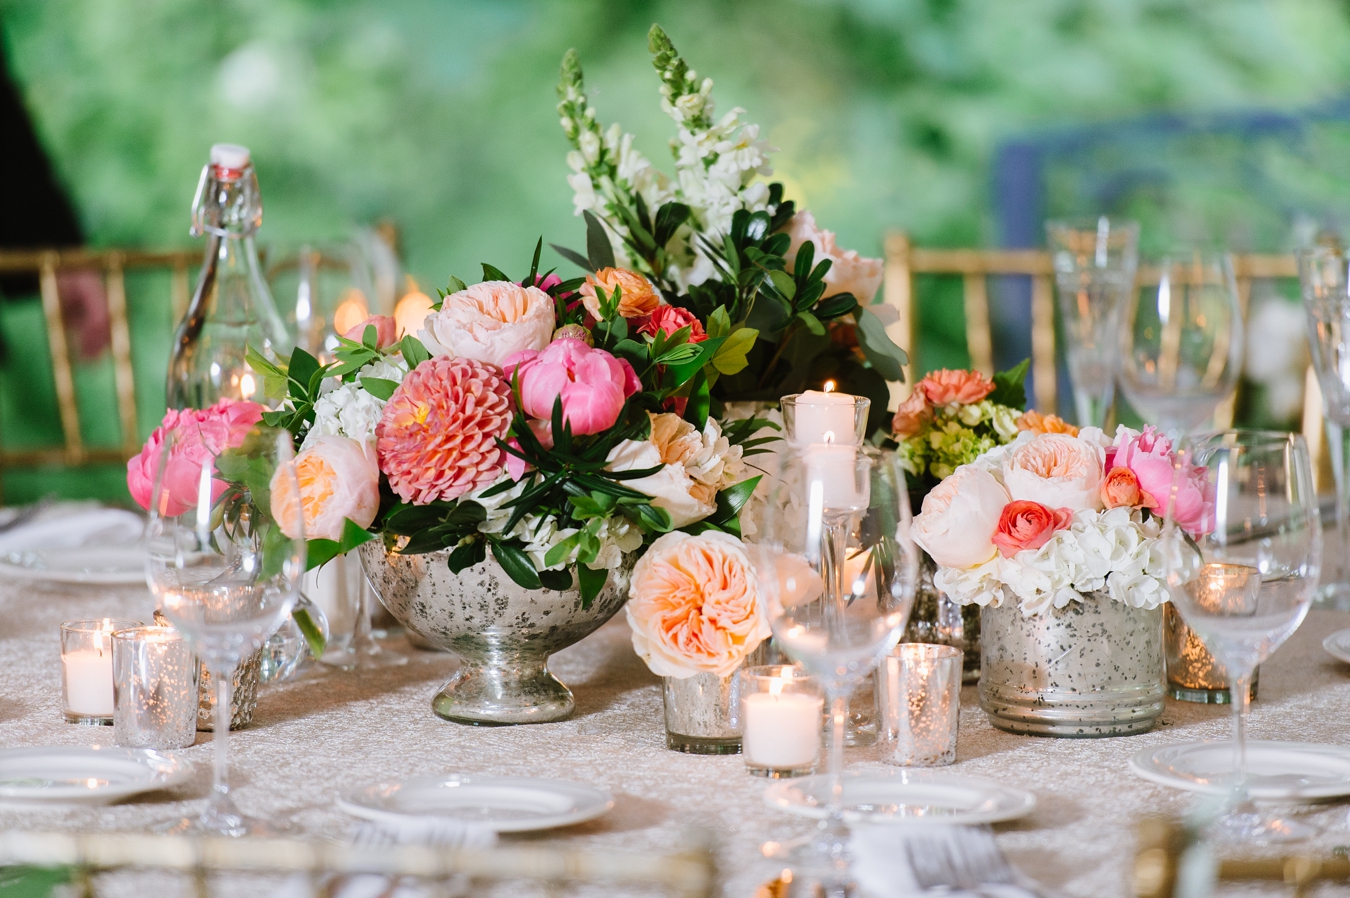 Romantic Garden Reception with Mercury Glass, Peonies and Garland by Ashlee Virginia Events | Natalie Franke Photography